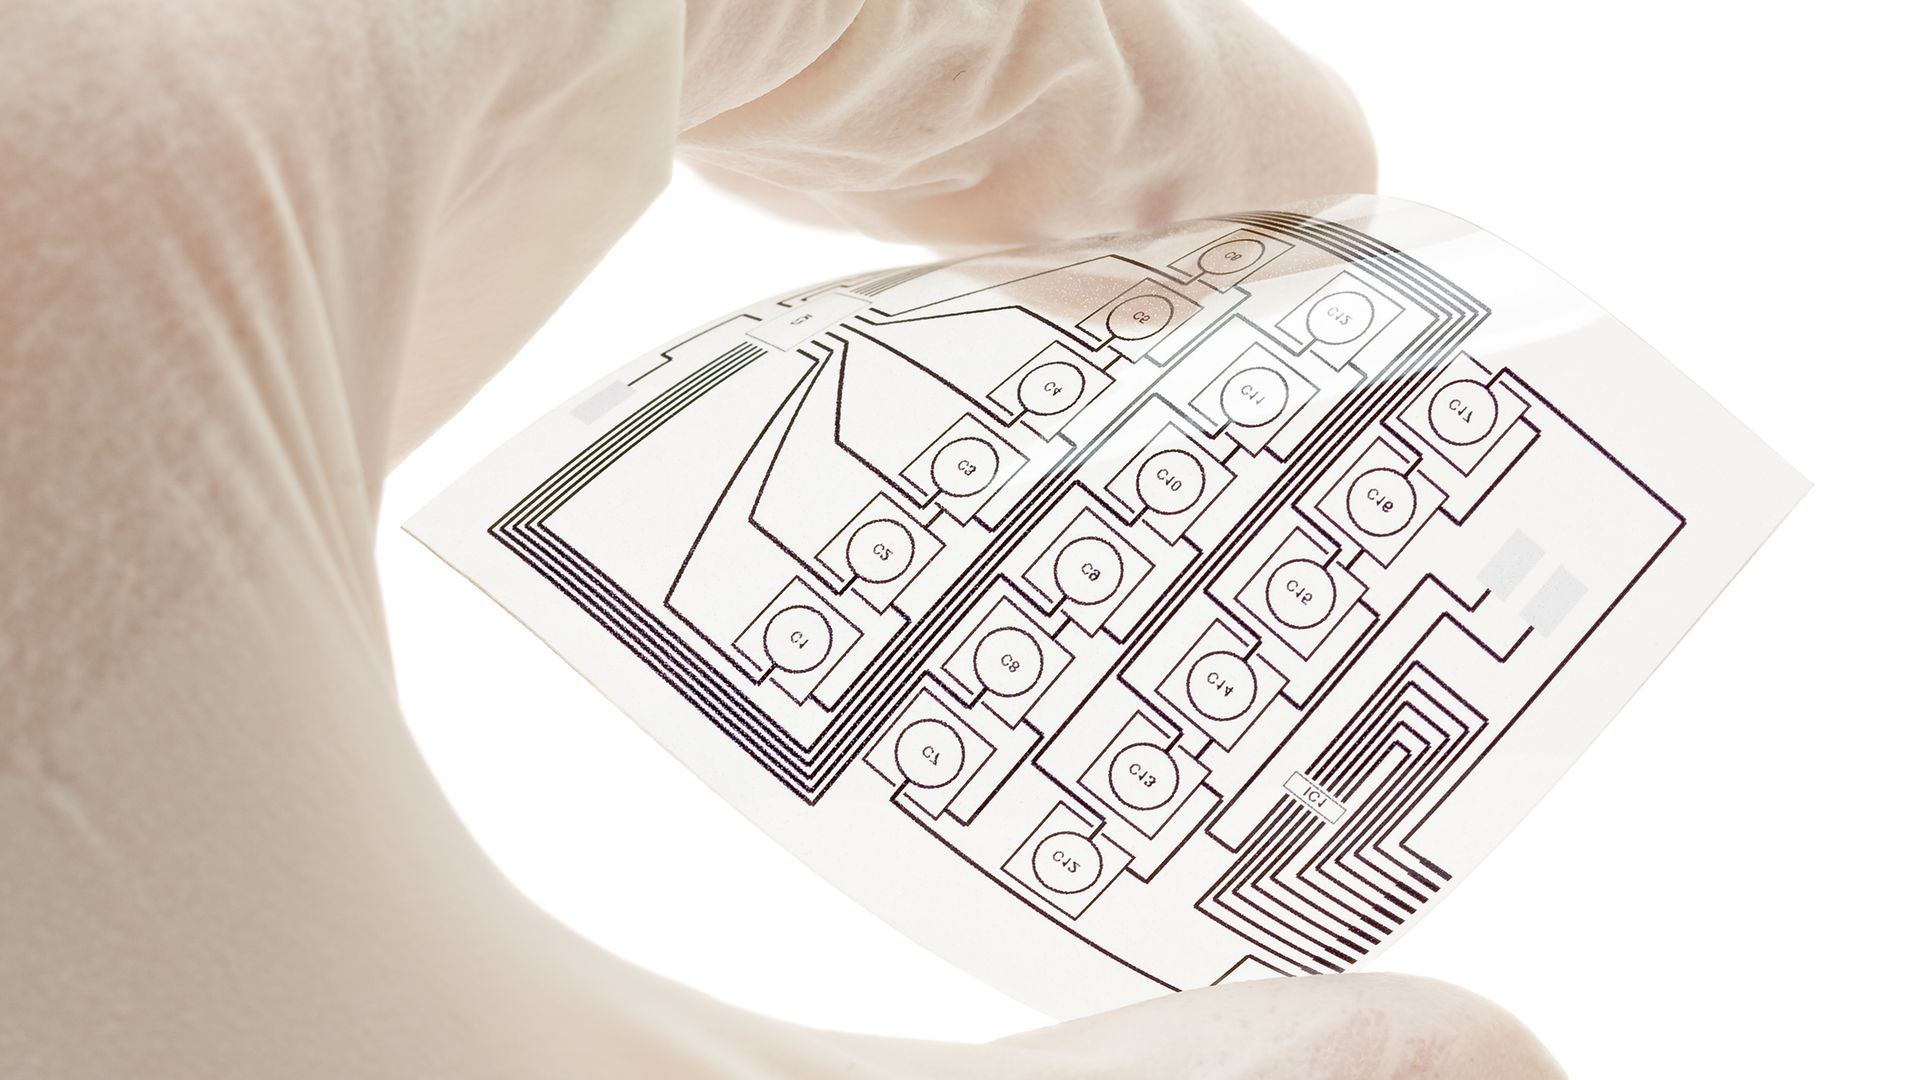 Printed electronics can make almost any object smart.